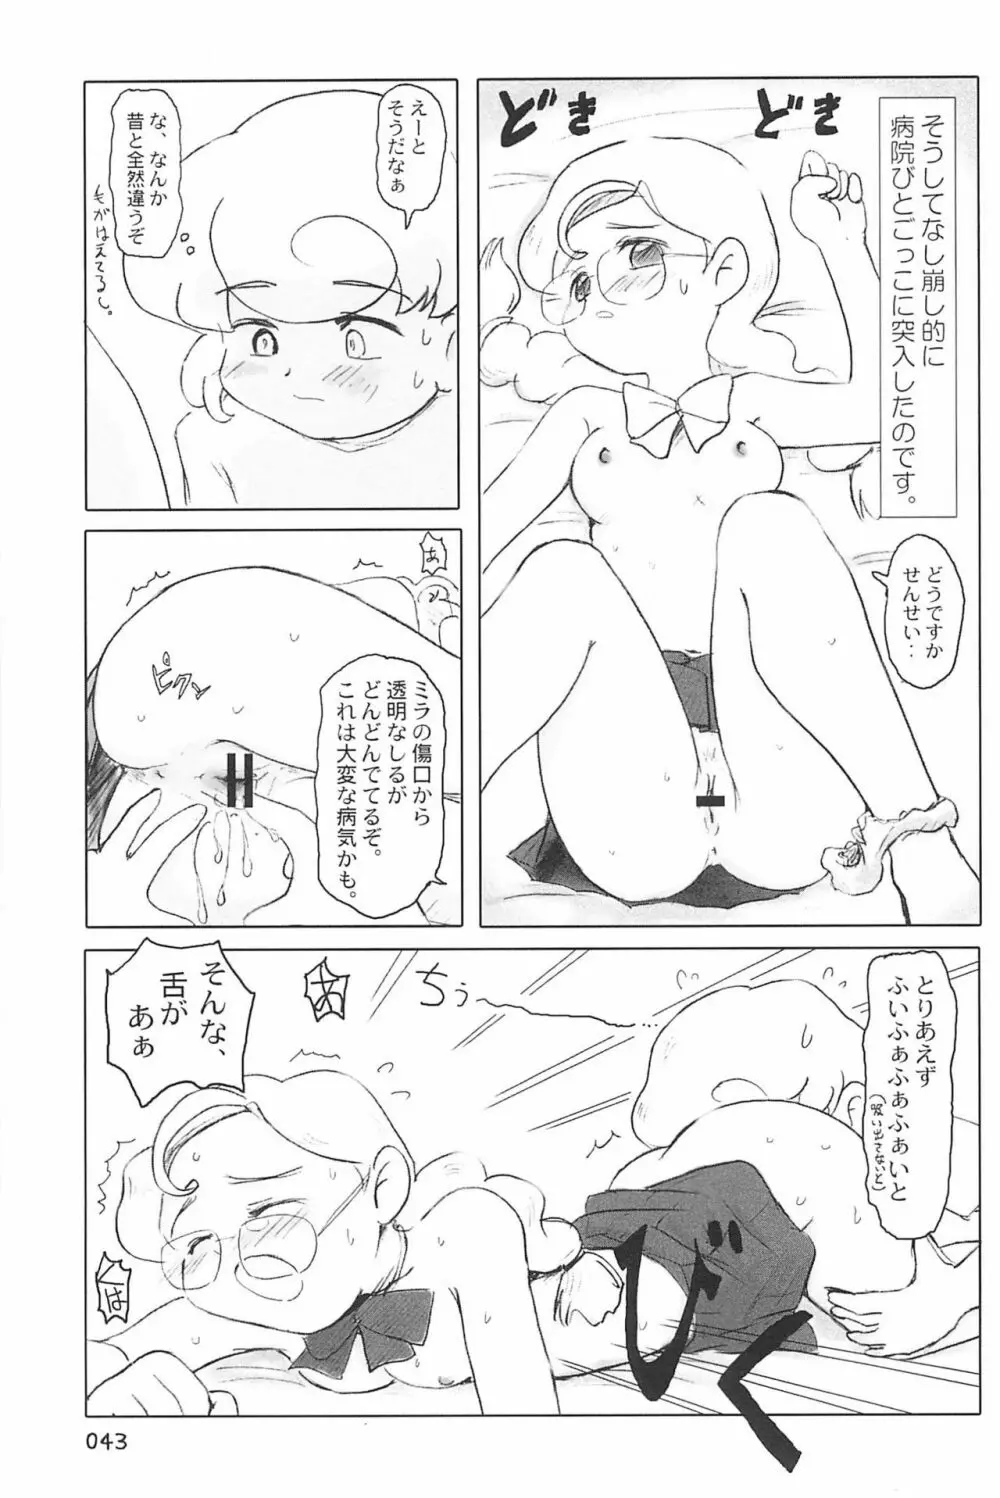 ND-special Volume 4 43ページ